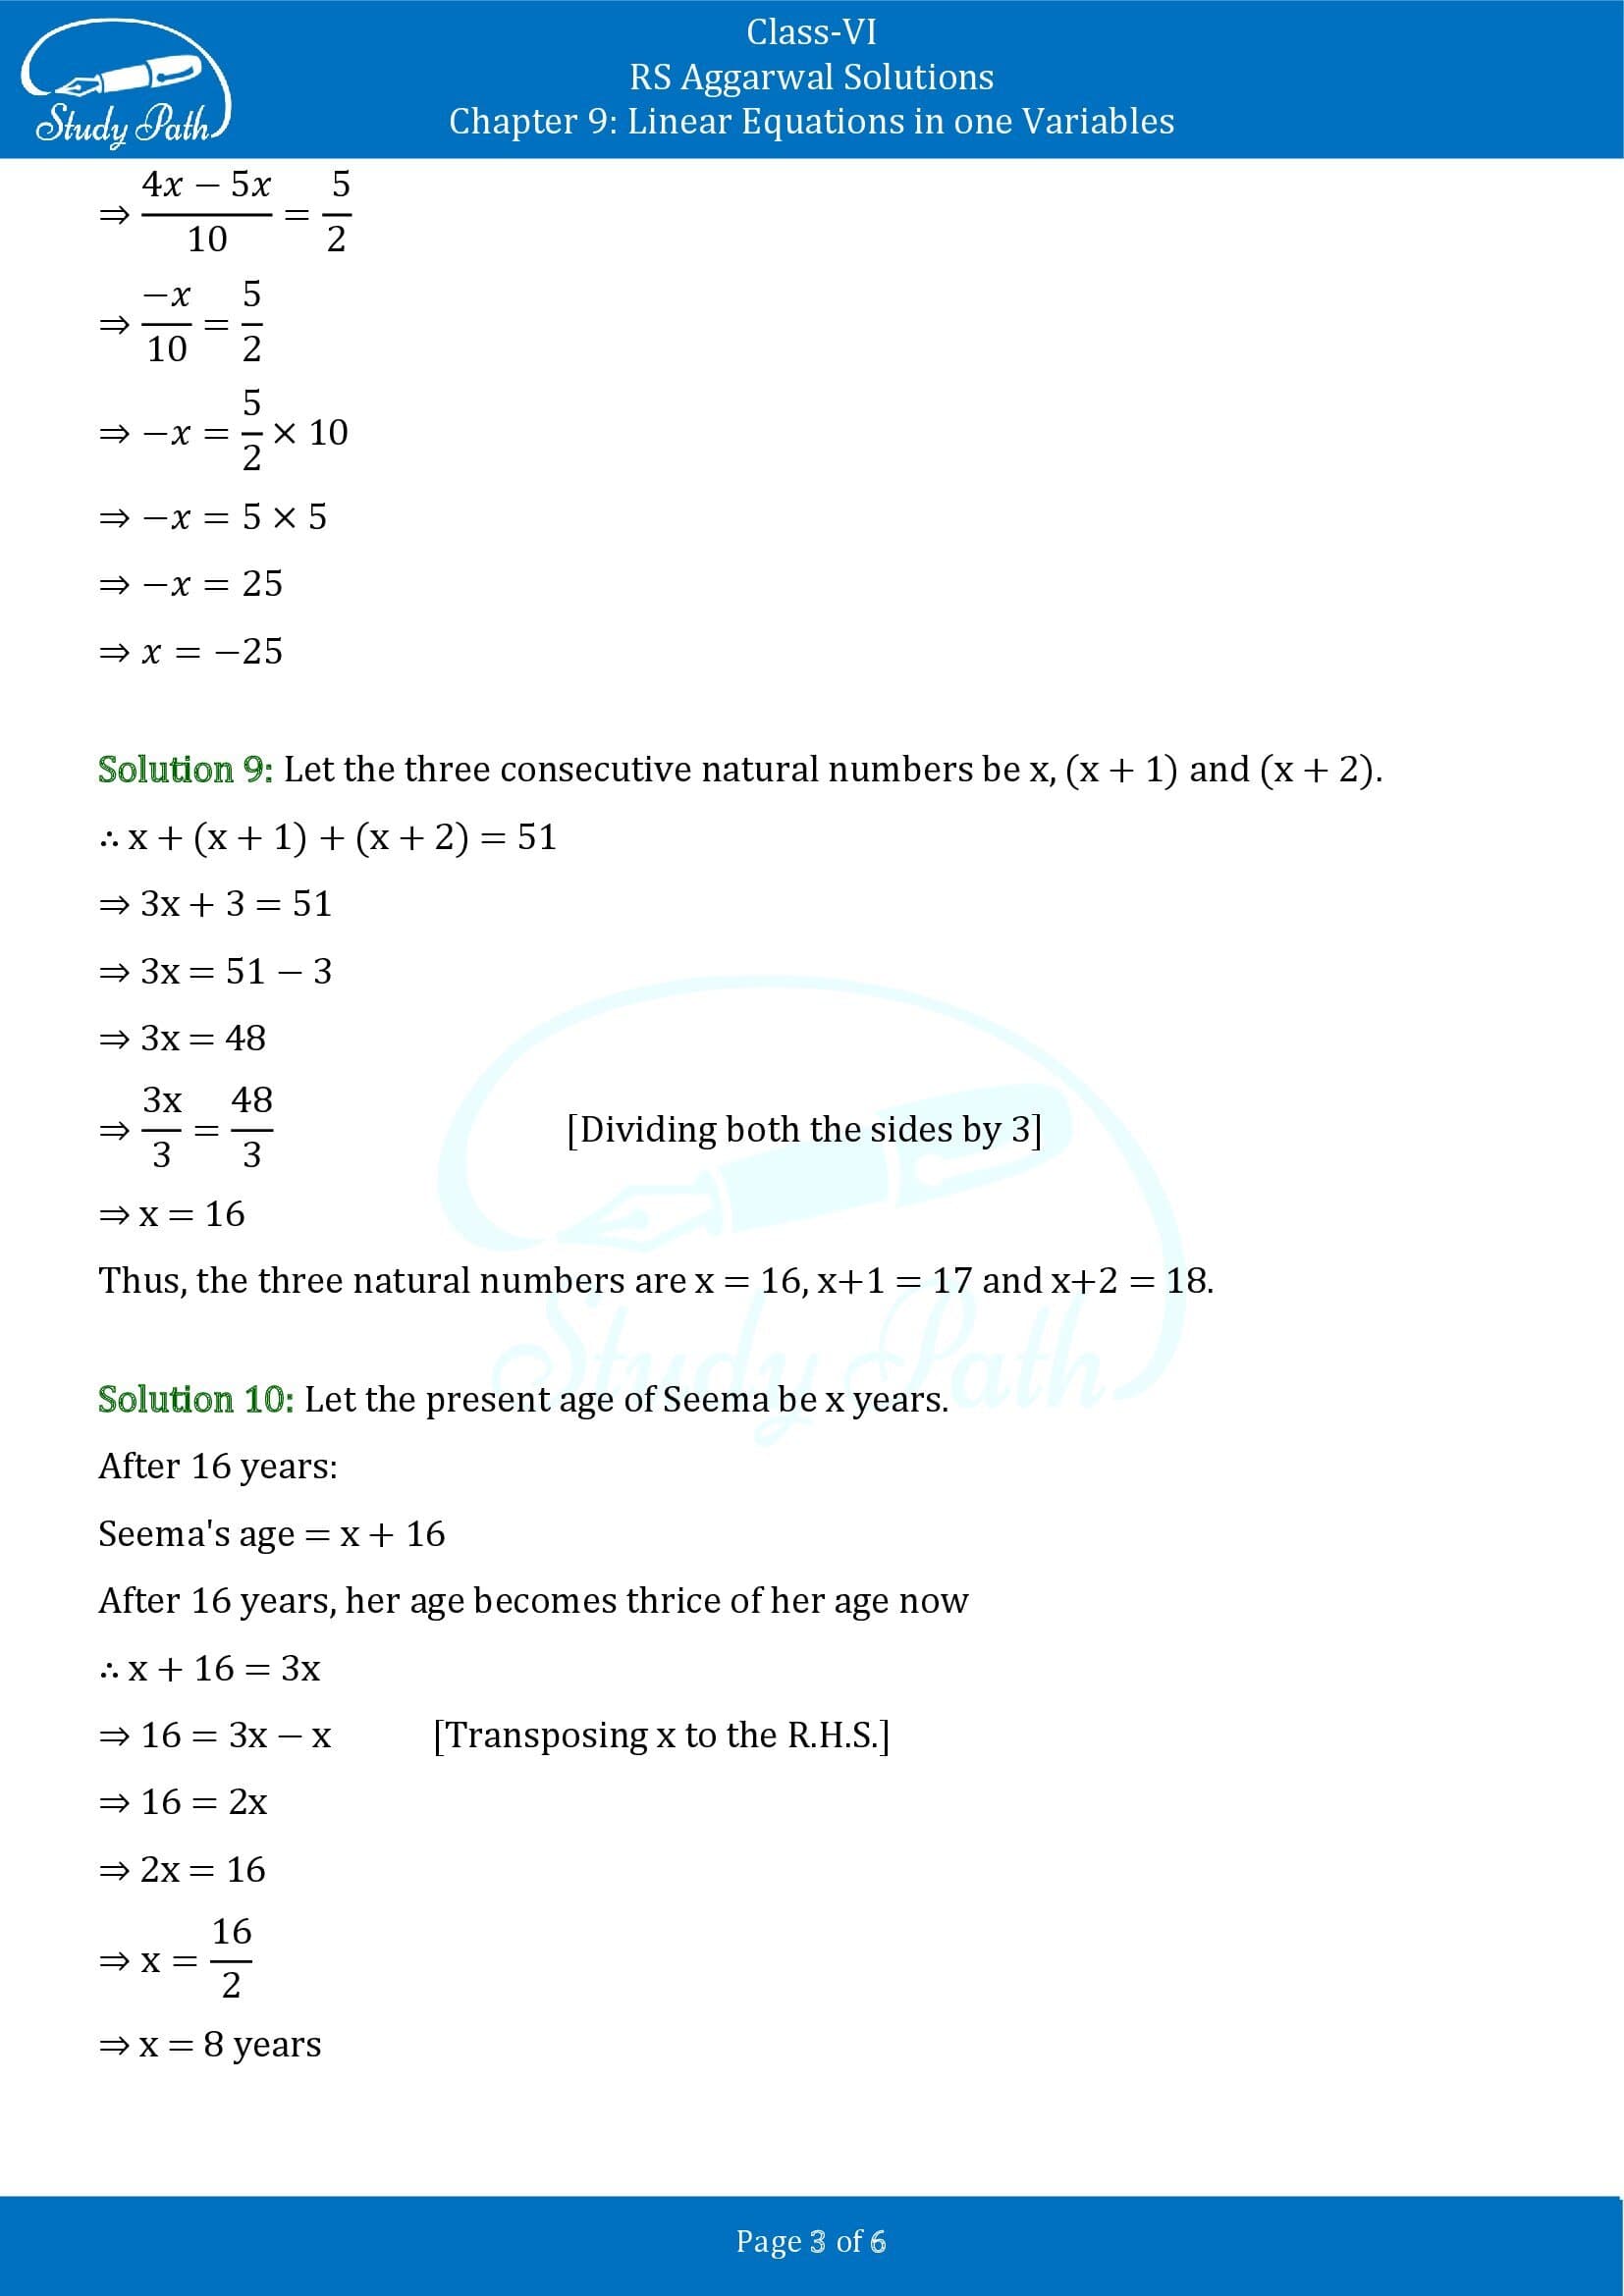 RS Aggarwal Solutions Class 6 Chapter 9 Linear Equations in One Variable Test Paper 00003